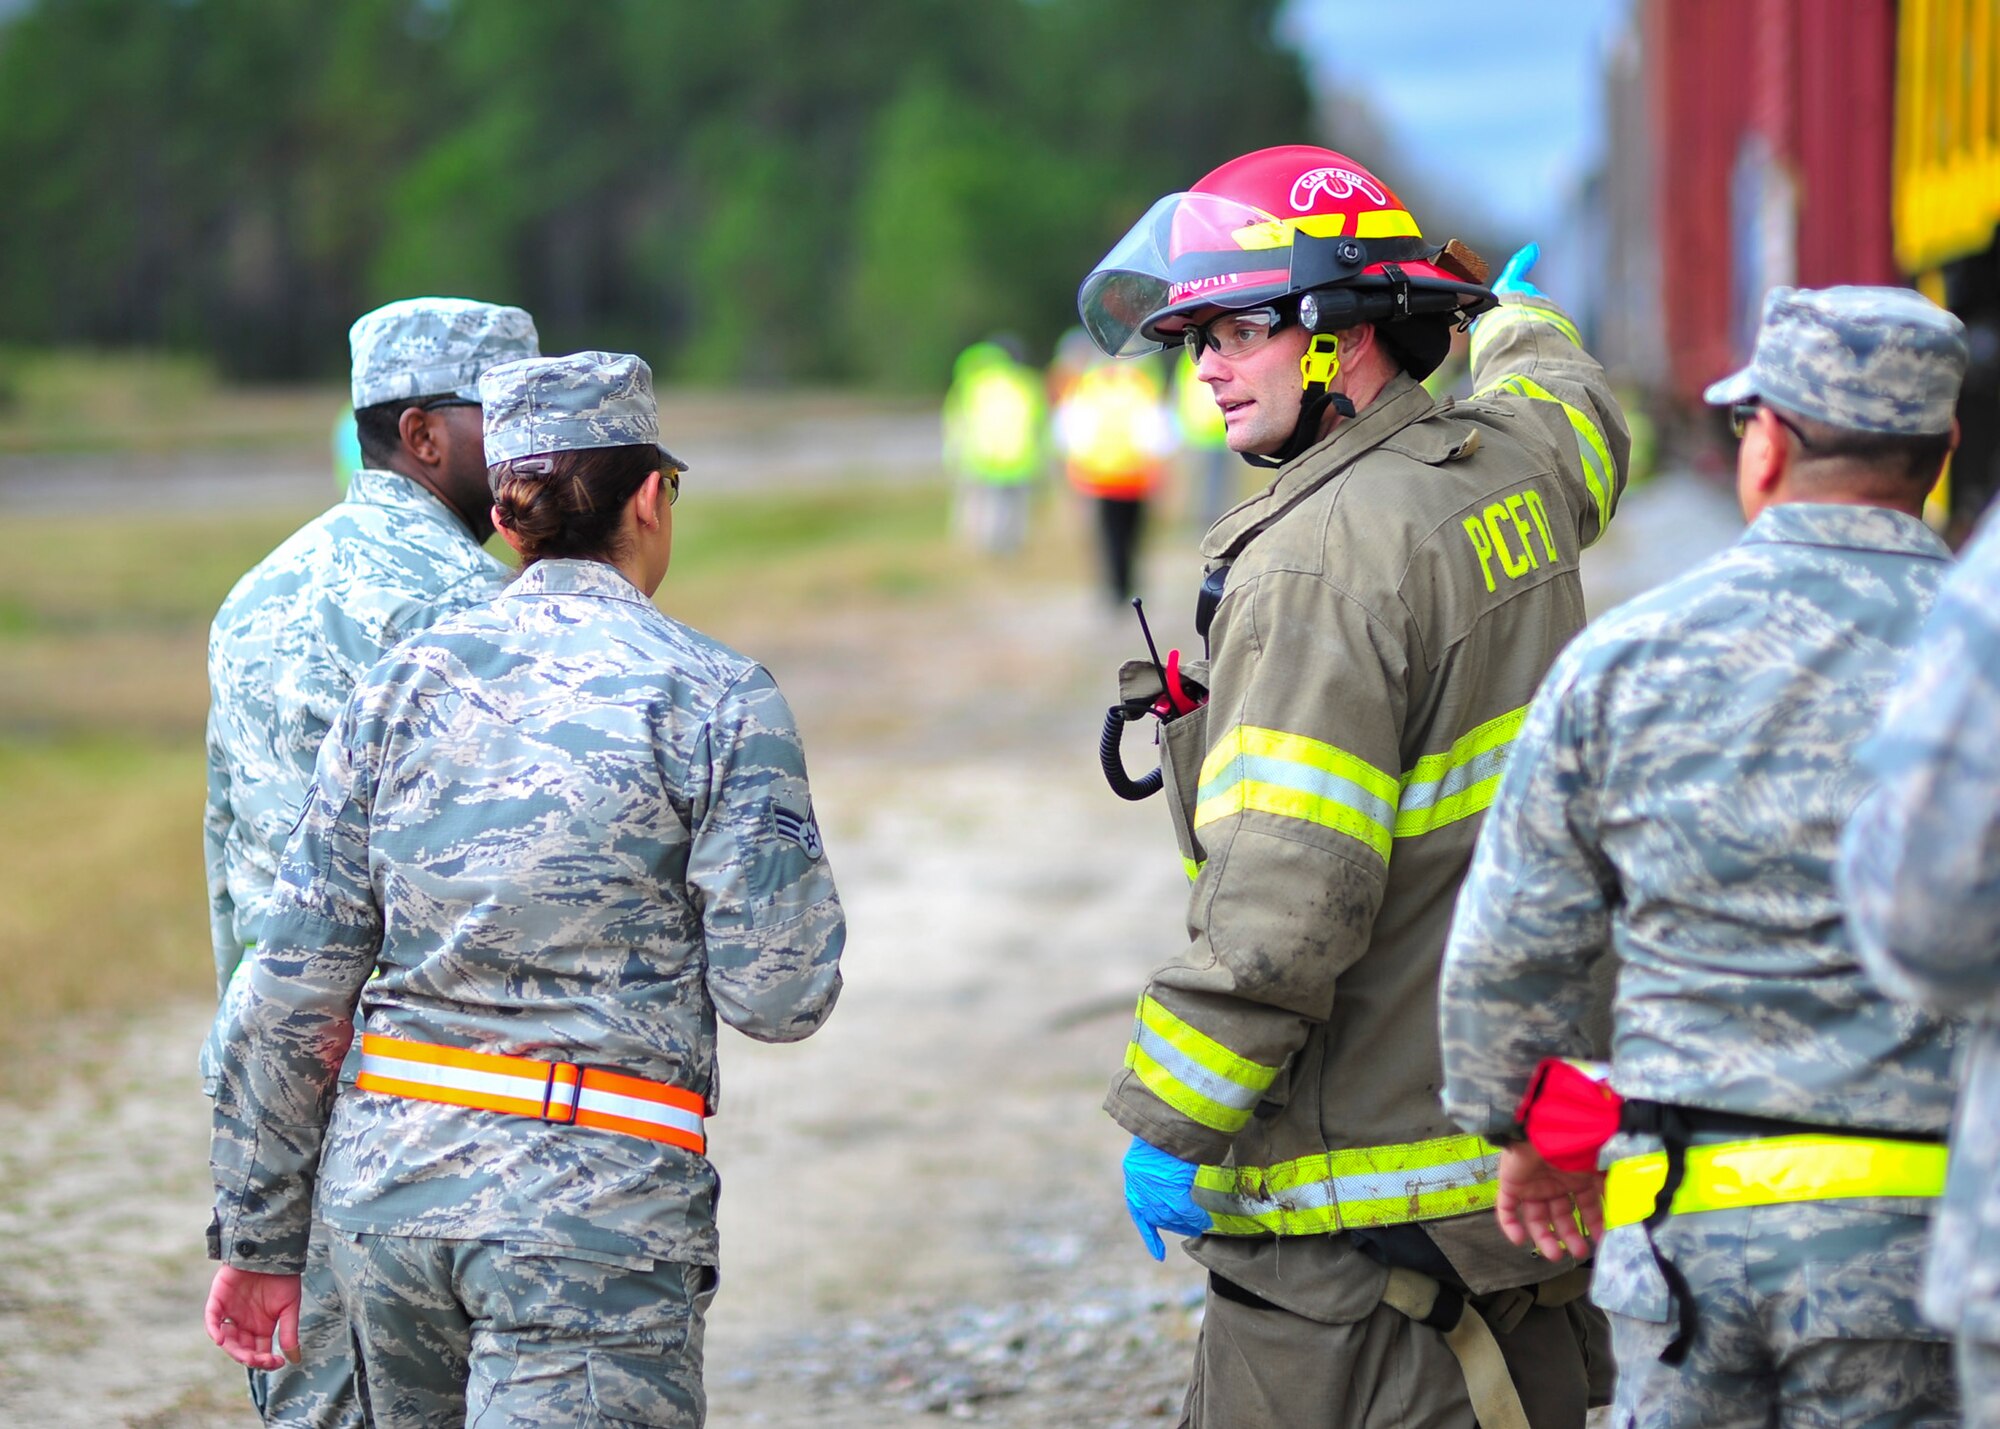 A Panama City Fire Department firefighter talks to Tyndall Airmen during a training exercise Dec. 17 at the Panama City Bay Line Railroad. More than 40 members of Tyndall joined over 150 people from local agencies to participate in an extensive train environment exercise. (U.S. Air Force photo by Senior Airman Dustin Mullen/Released)